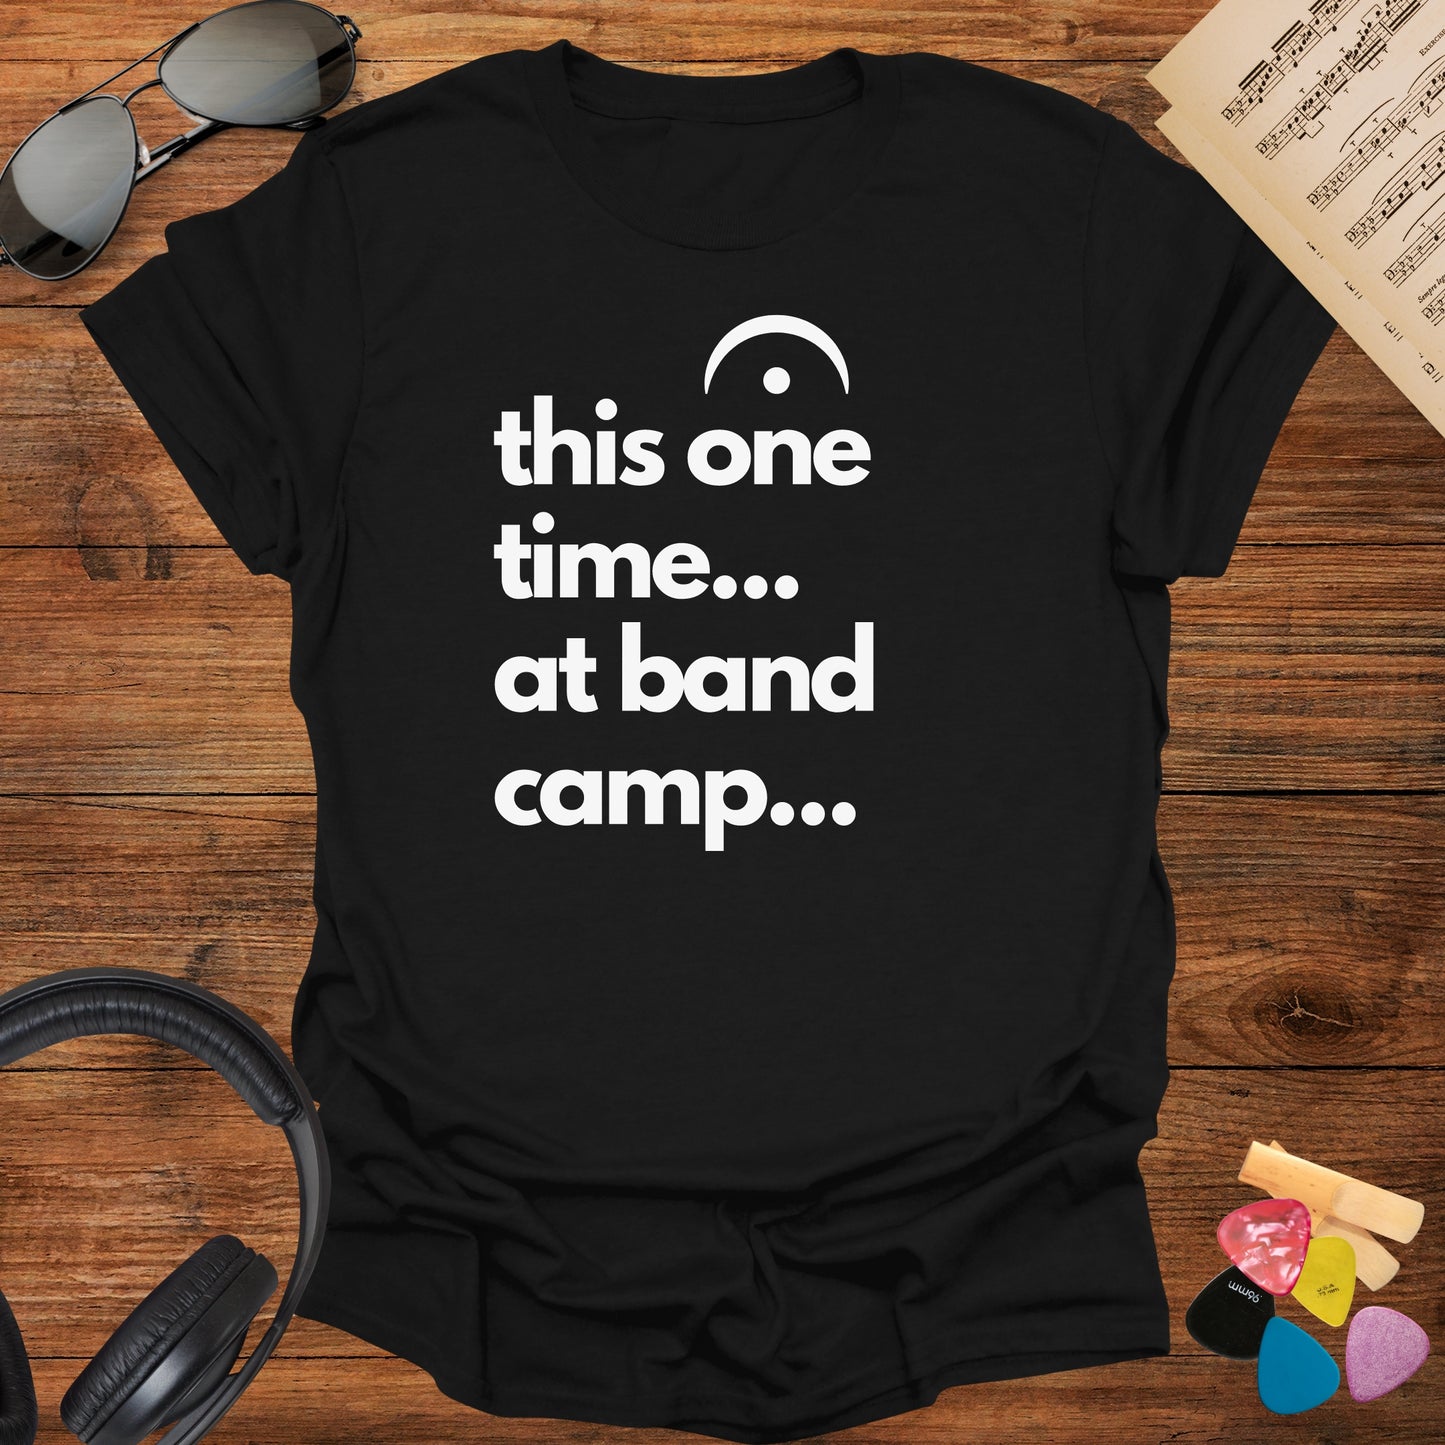 One Time at Band Camp